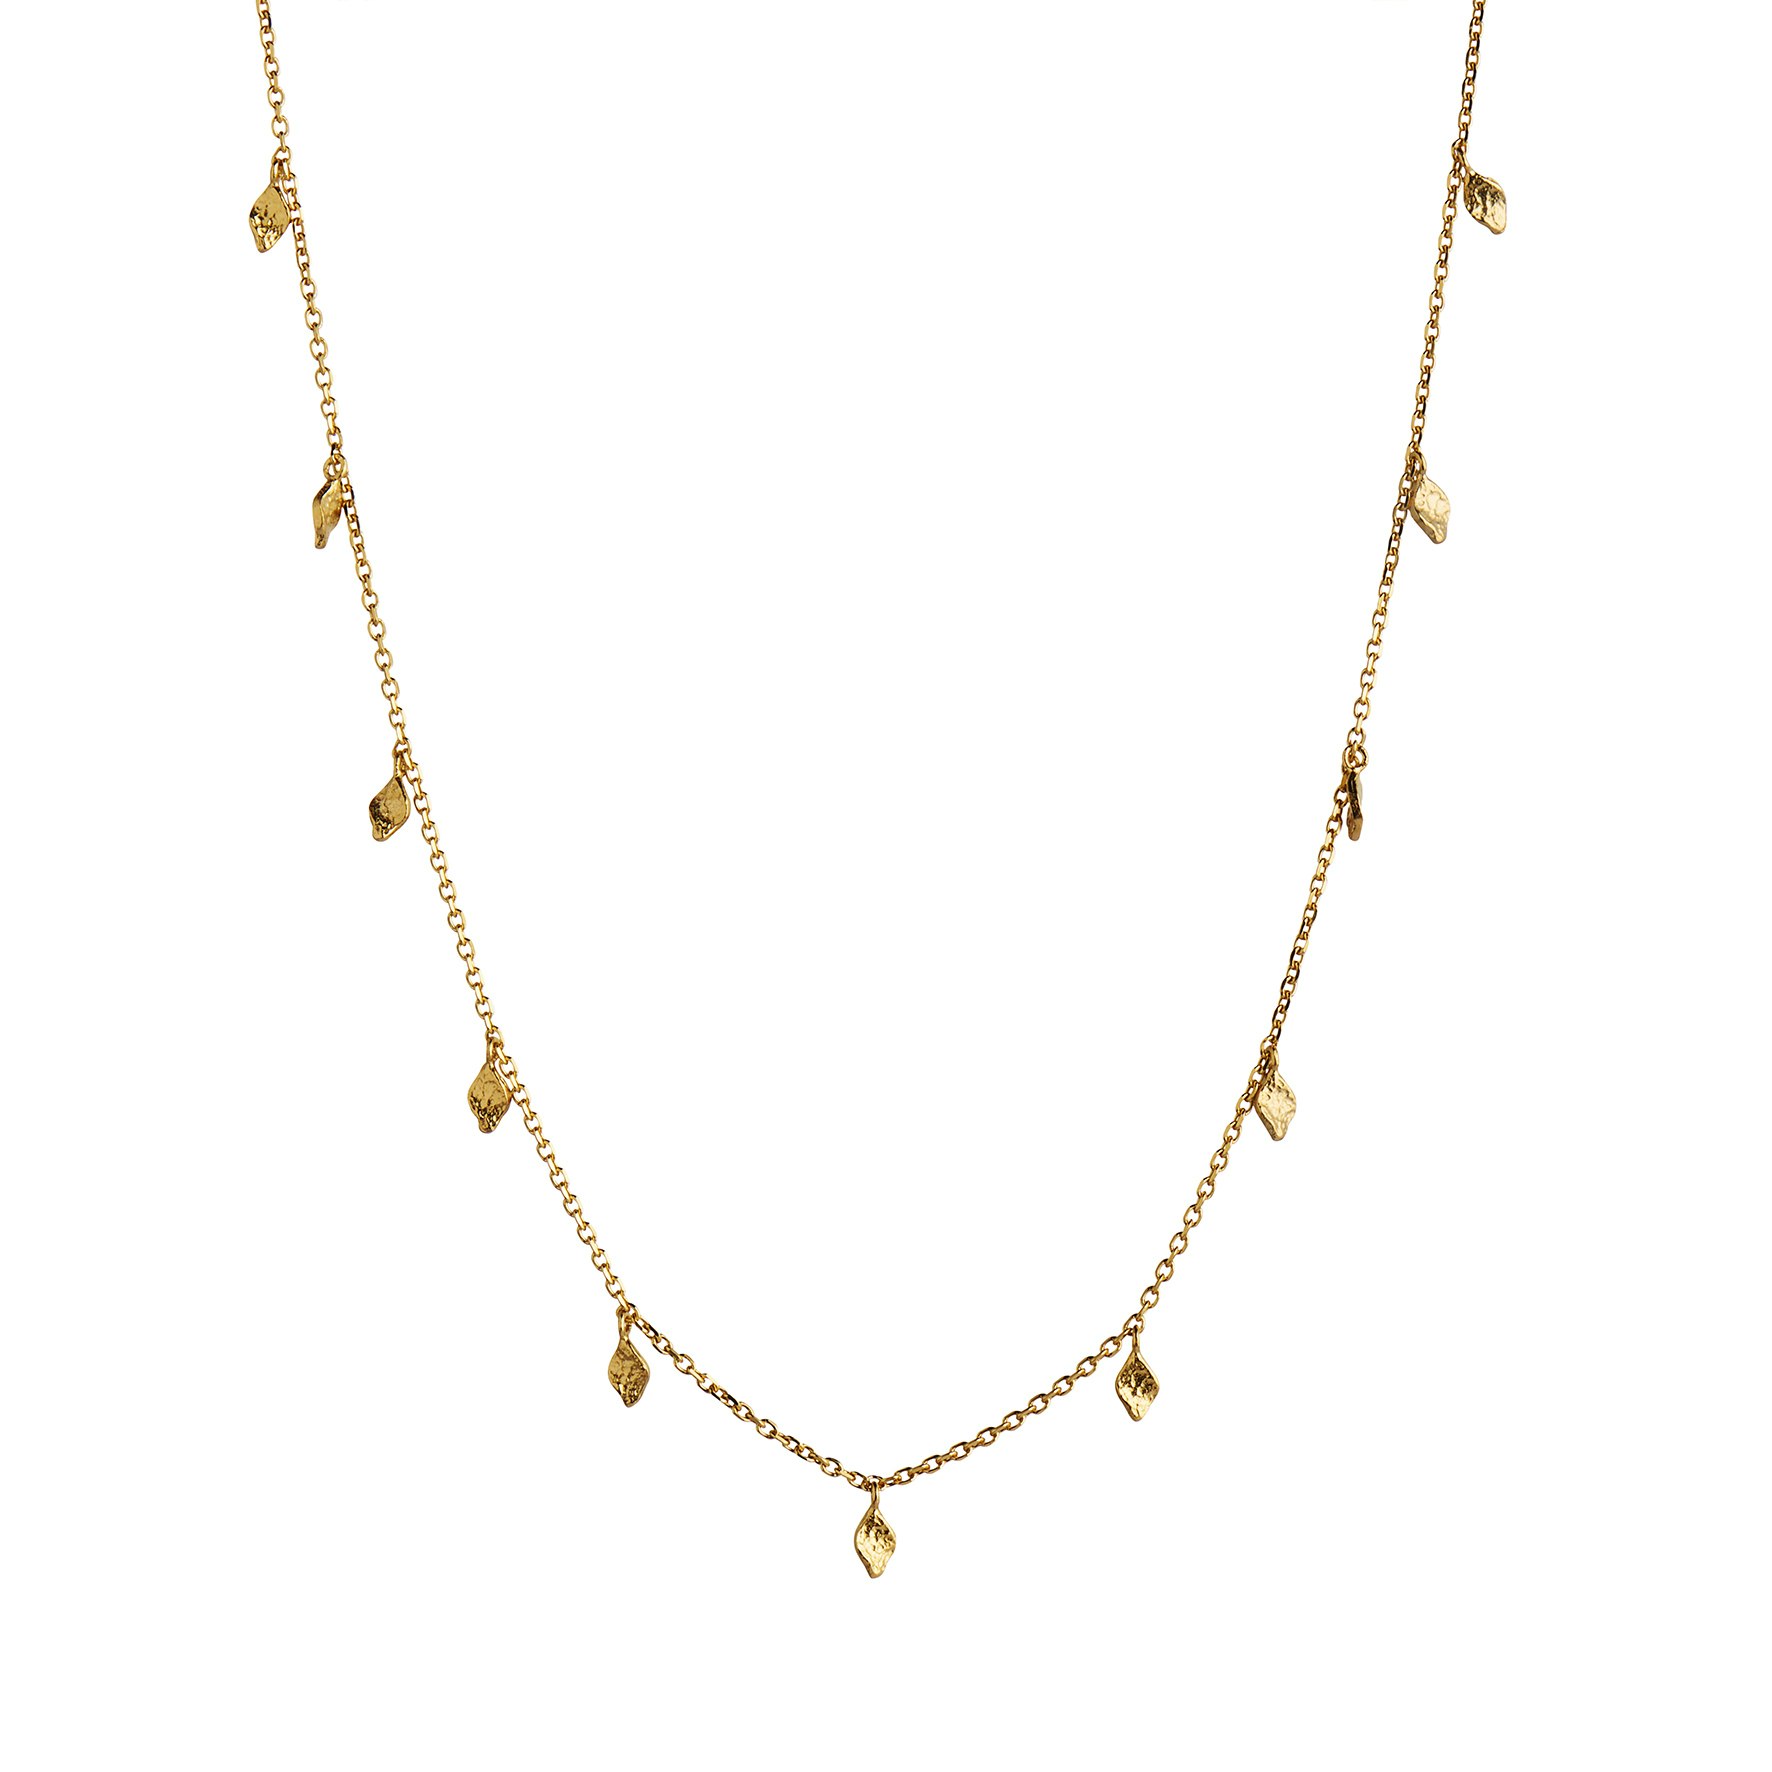 Tout Petit Ile De L'Amour Necklace from STINE A Jewelry in Goldplated Silver Sterling 925